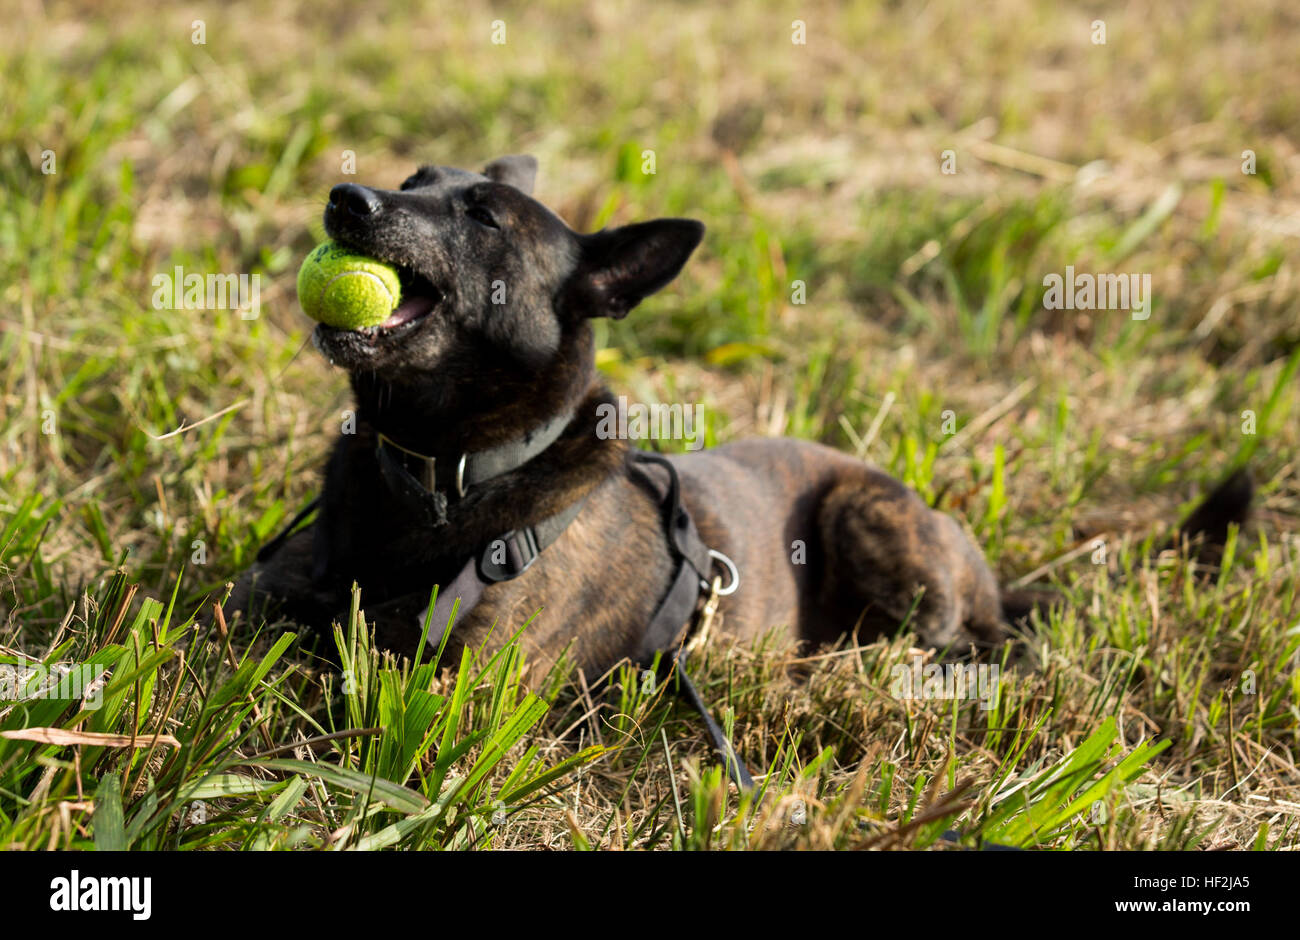 Nicky, a military working dog with Military Working Dog Platoon, 2nd Law Enforcement Battalion, II Marine Expeditionary Force Headquarters Group, chews on a tennis ball after tracking the scent of a Marine aboard Marine Corps Base Camp Lejeune, N.C., Oct. 9, 2014. Seven Marines and five canines conducted bite, tracker and patrol training, enhancing the dogs’ sense of hearing and smelling. (U.S. Marine Corps photo by Lance Cpl. Lucas J. Hopkins/Released) Unleashed, Military Working Dogs, handlers build relationship 141009-M-TR086-131 Stock Photo